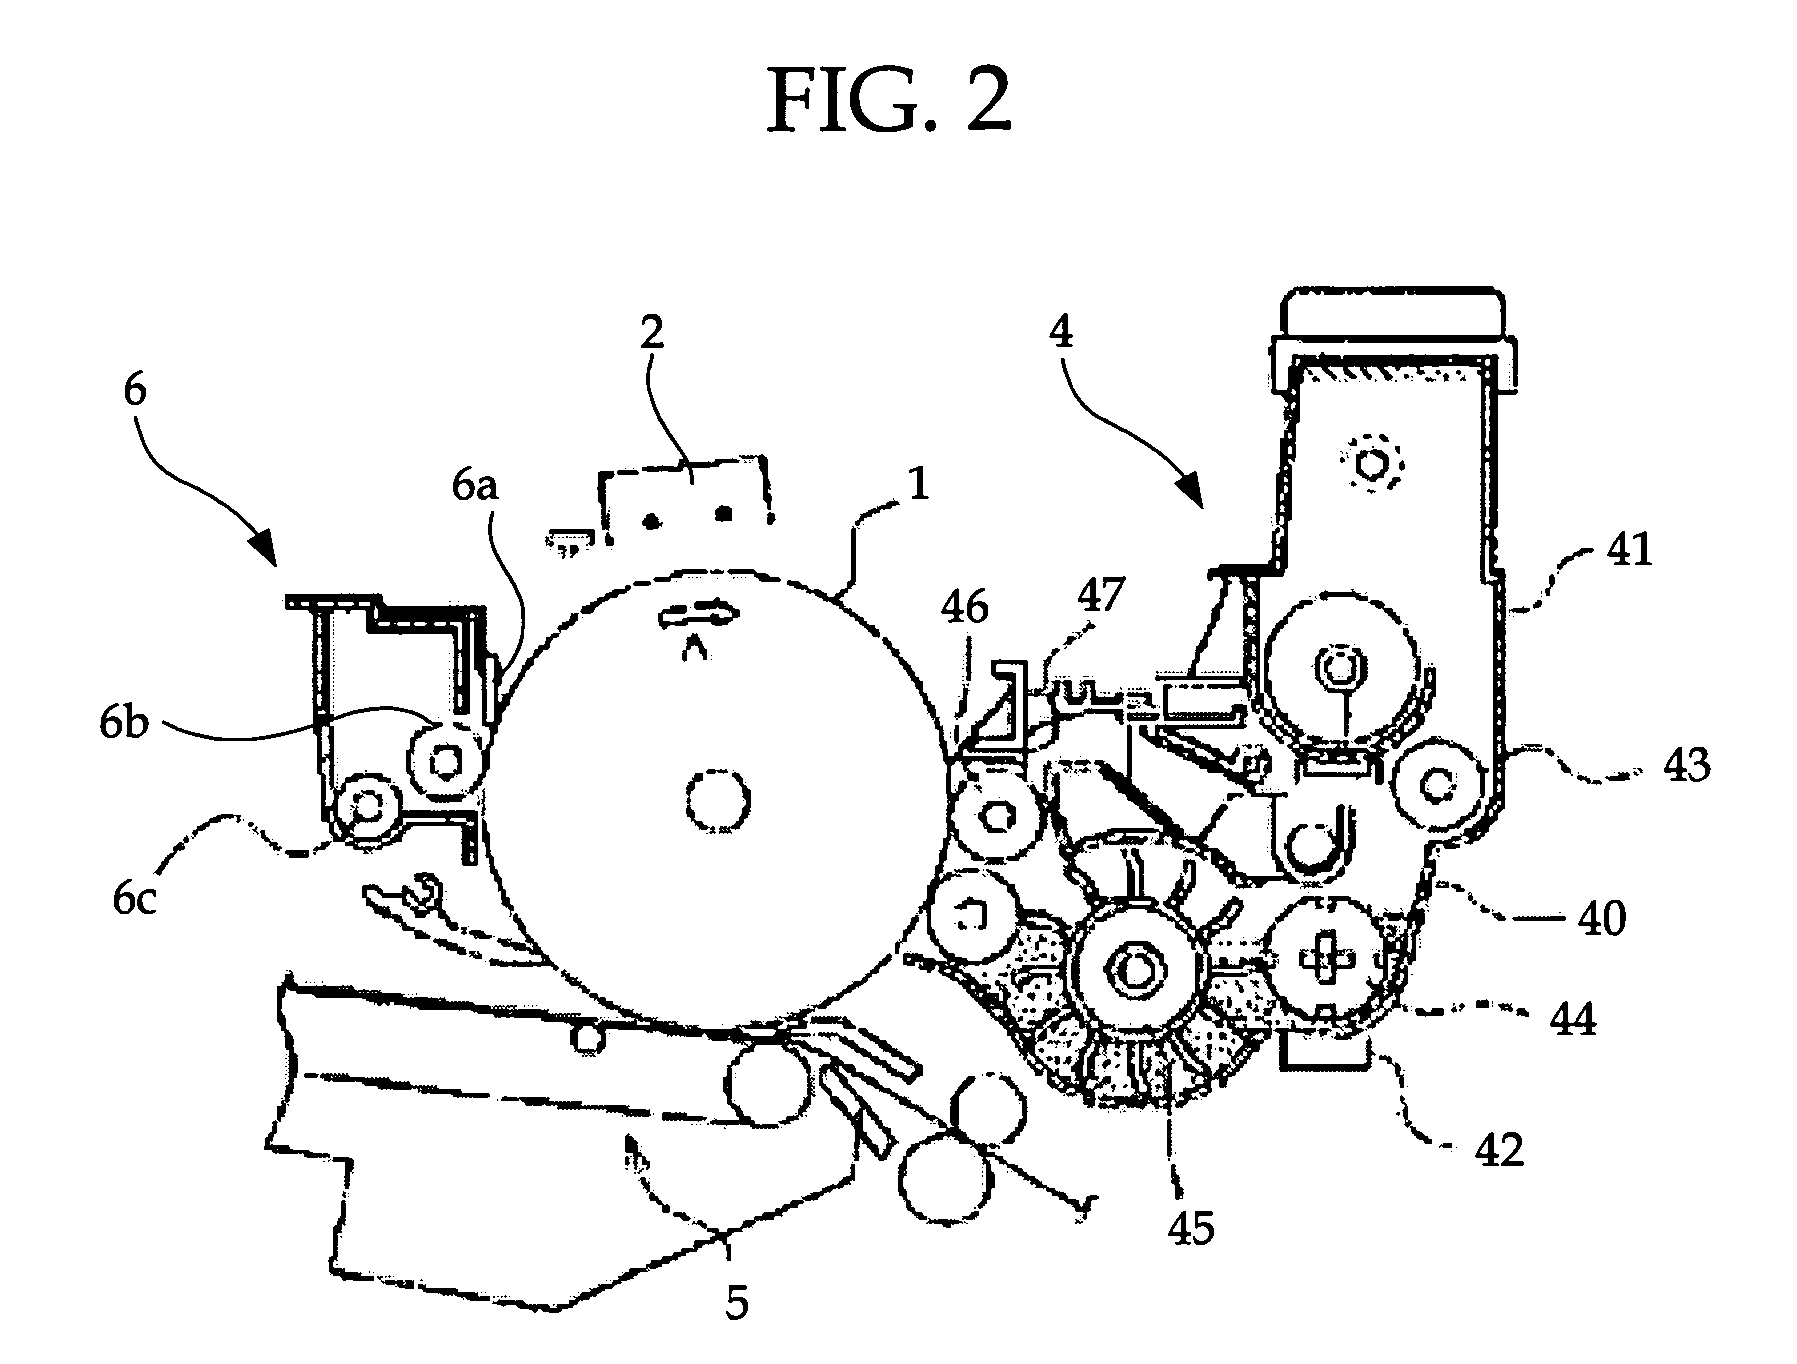 Toner and image forming apparatus using the toner